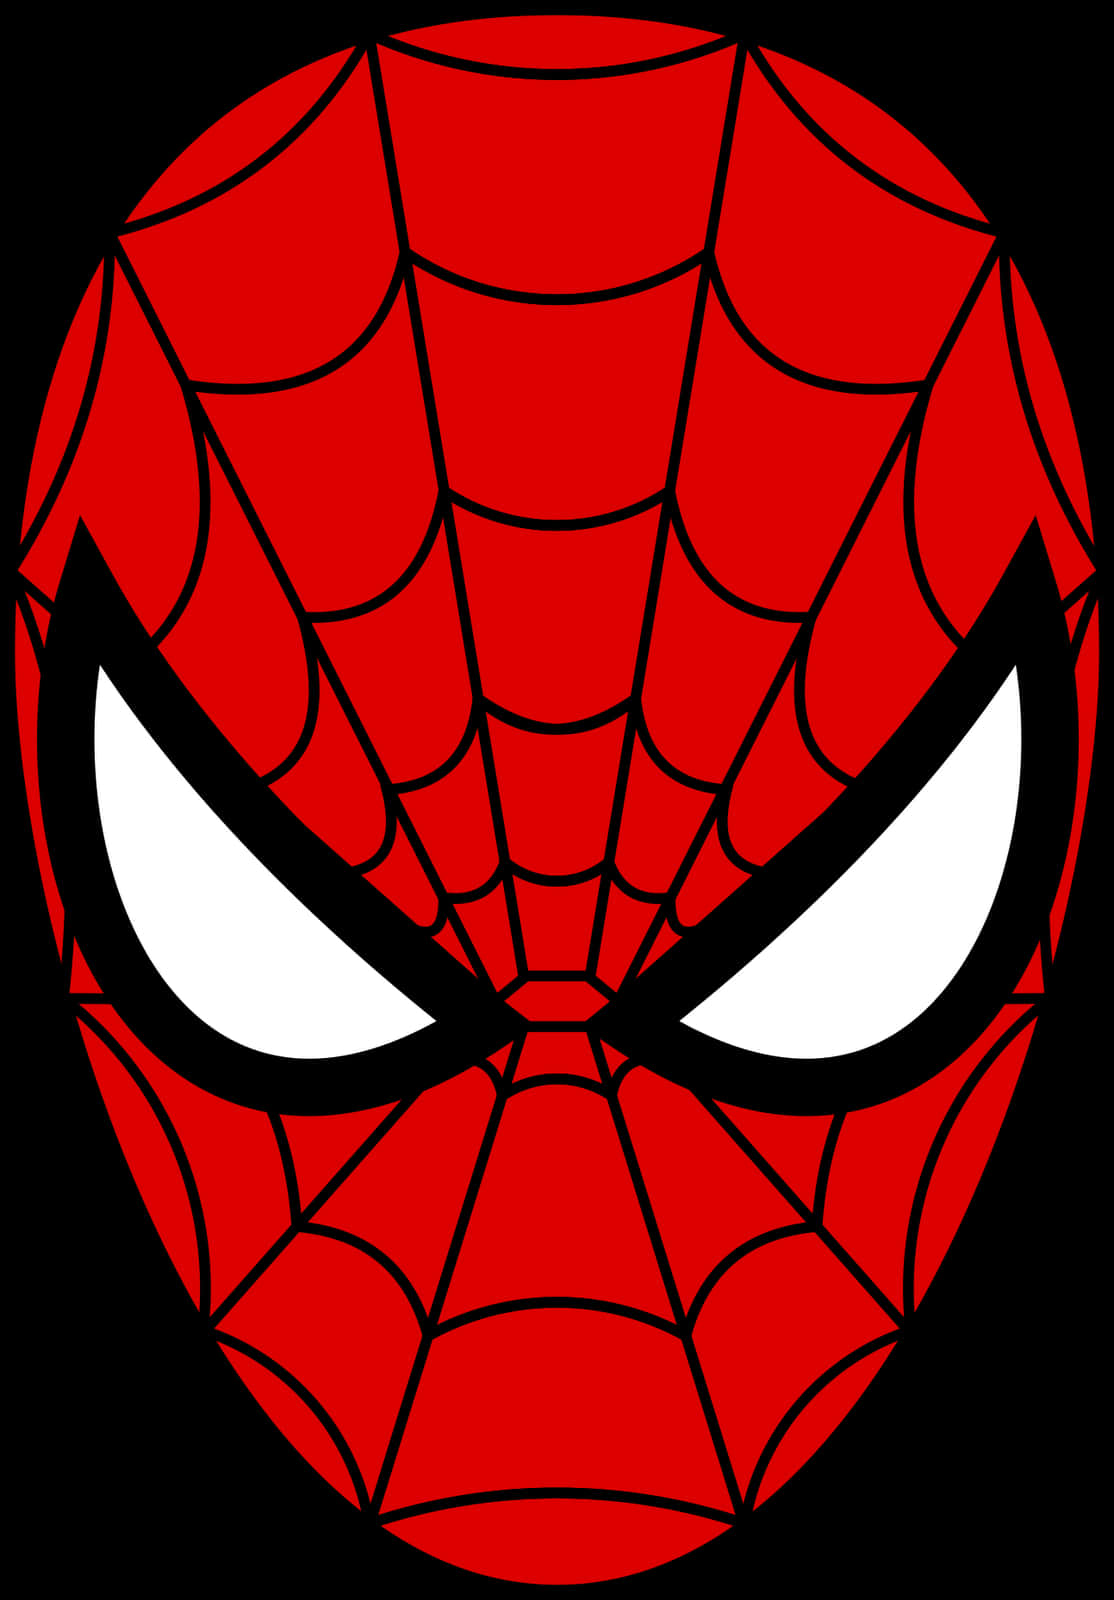 Iconic Spiderman Mask Graphic PNG